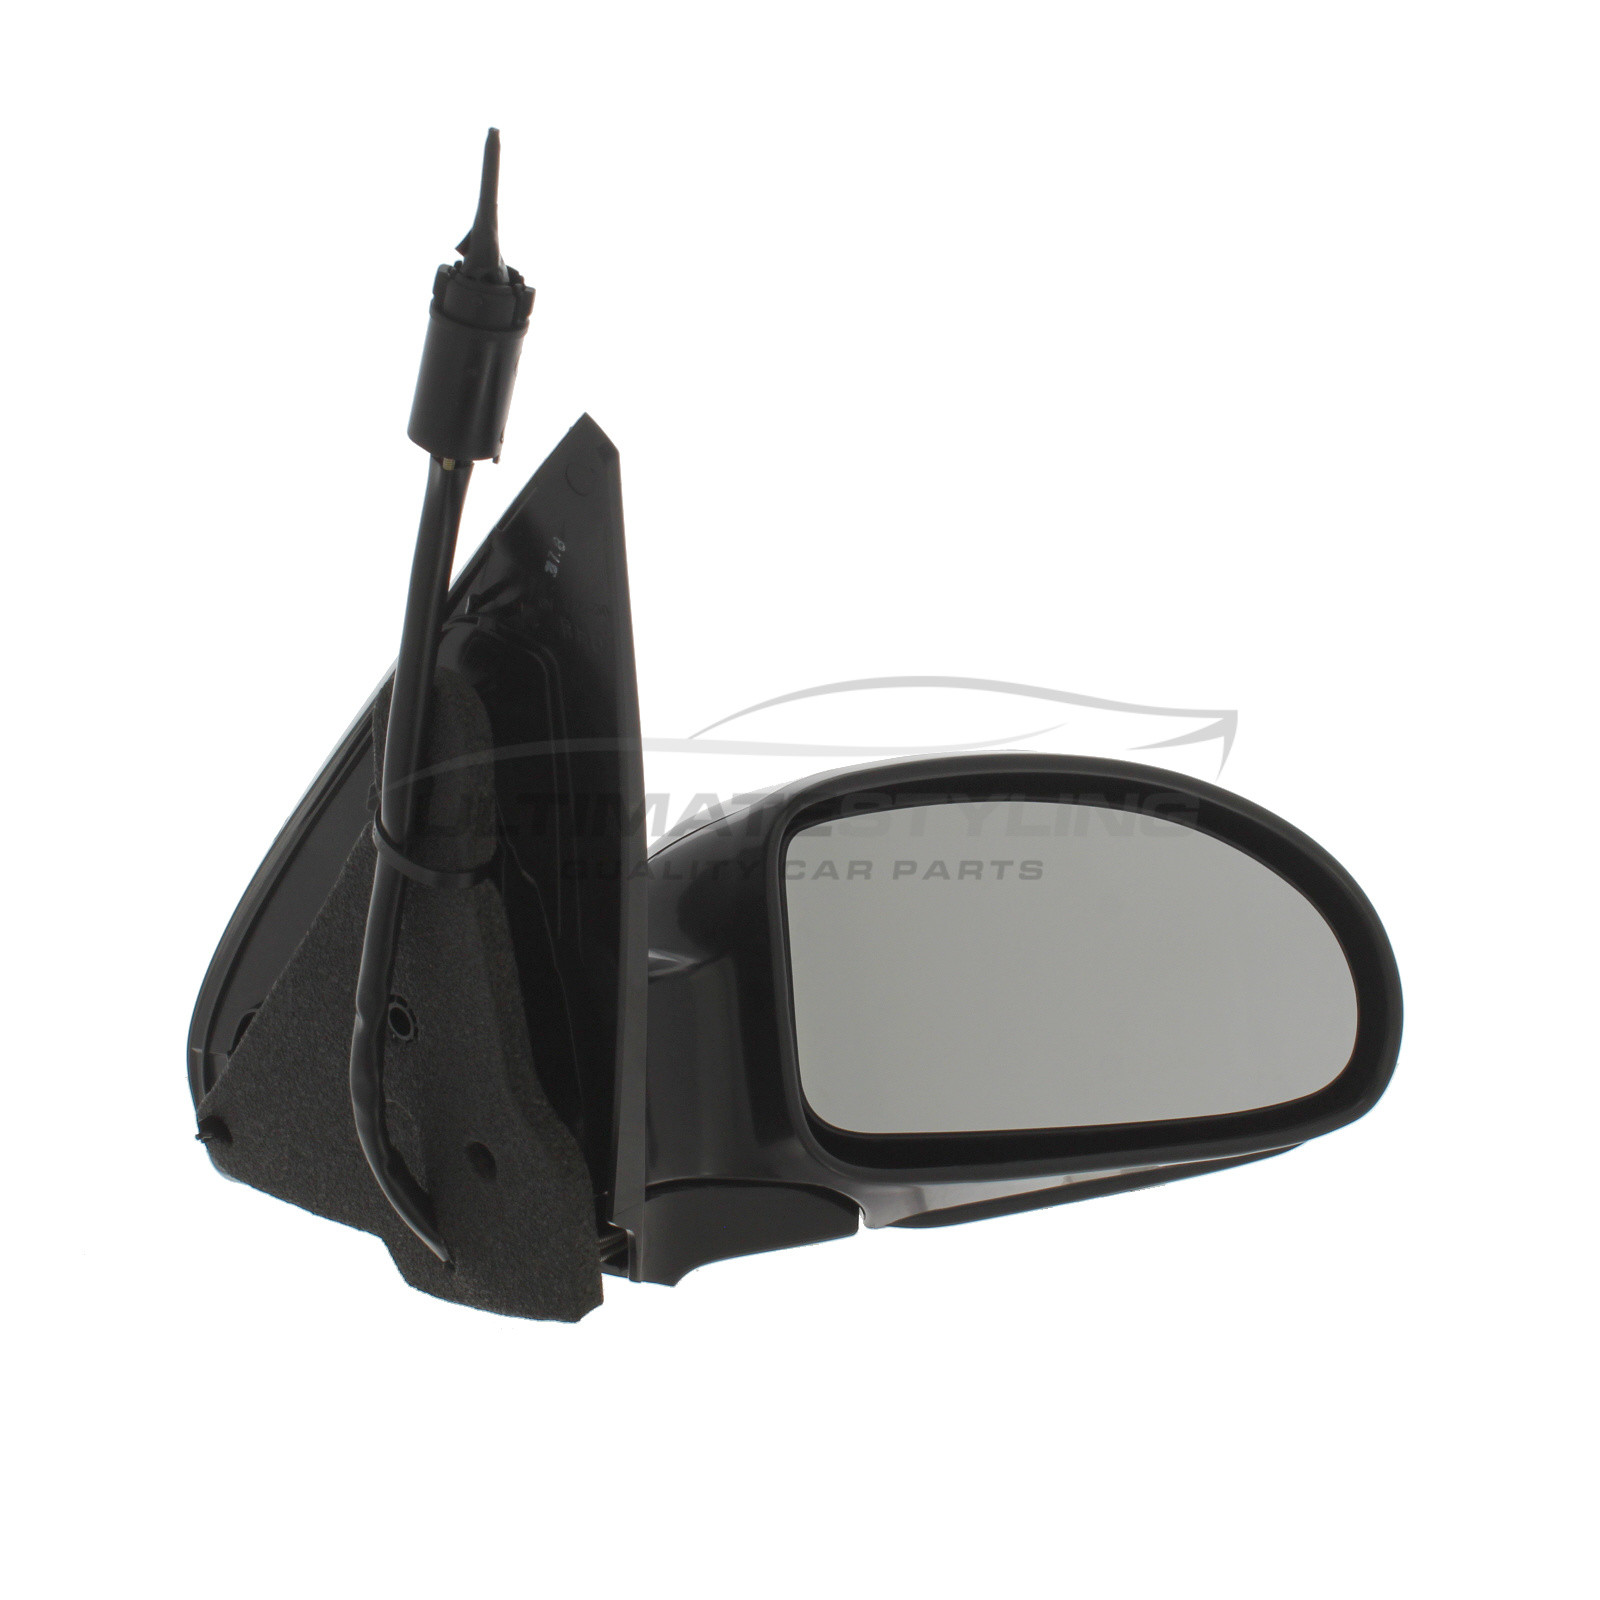 2000 2001 2002 2003 2004 2005 2006 2007 Dependable Direct Driver and Passenger Textured Non-Heated Non-Folding Door Mirrors for USA Built Ford Focus 